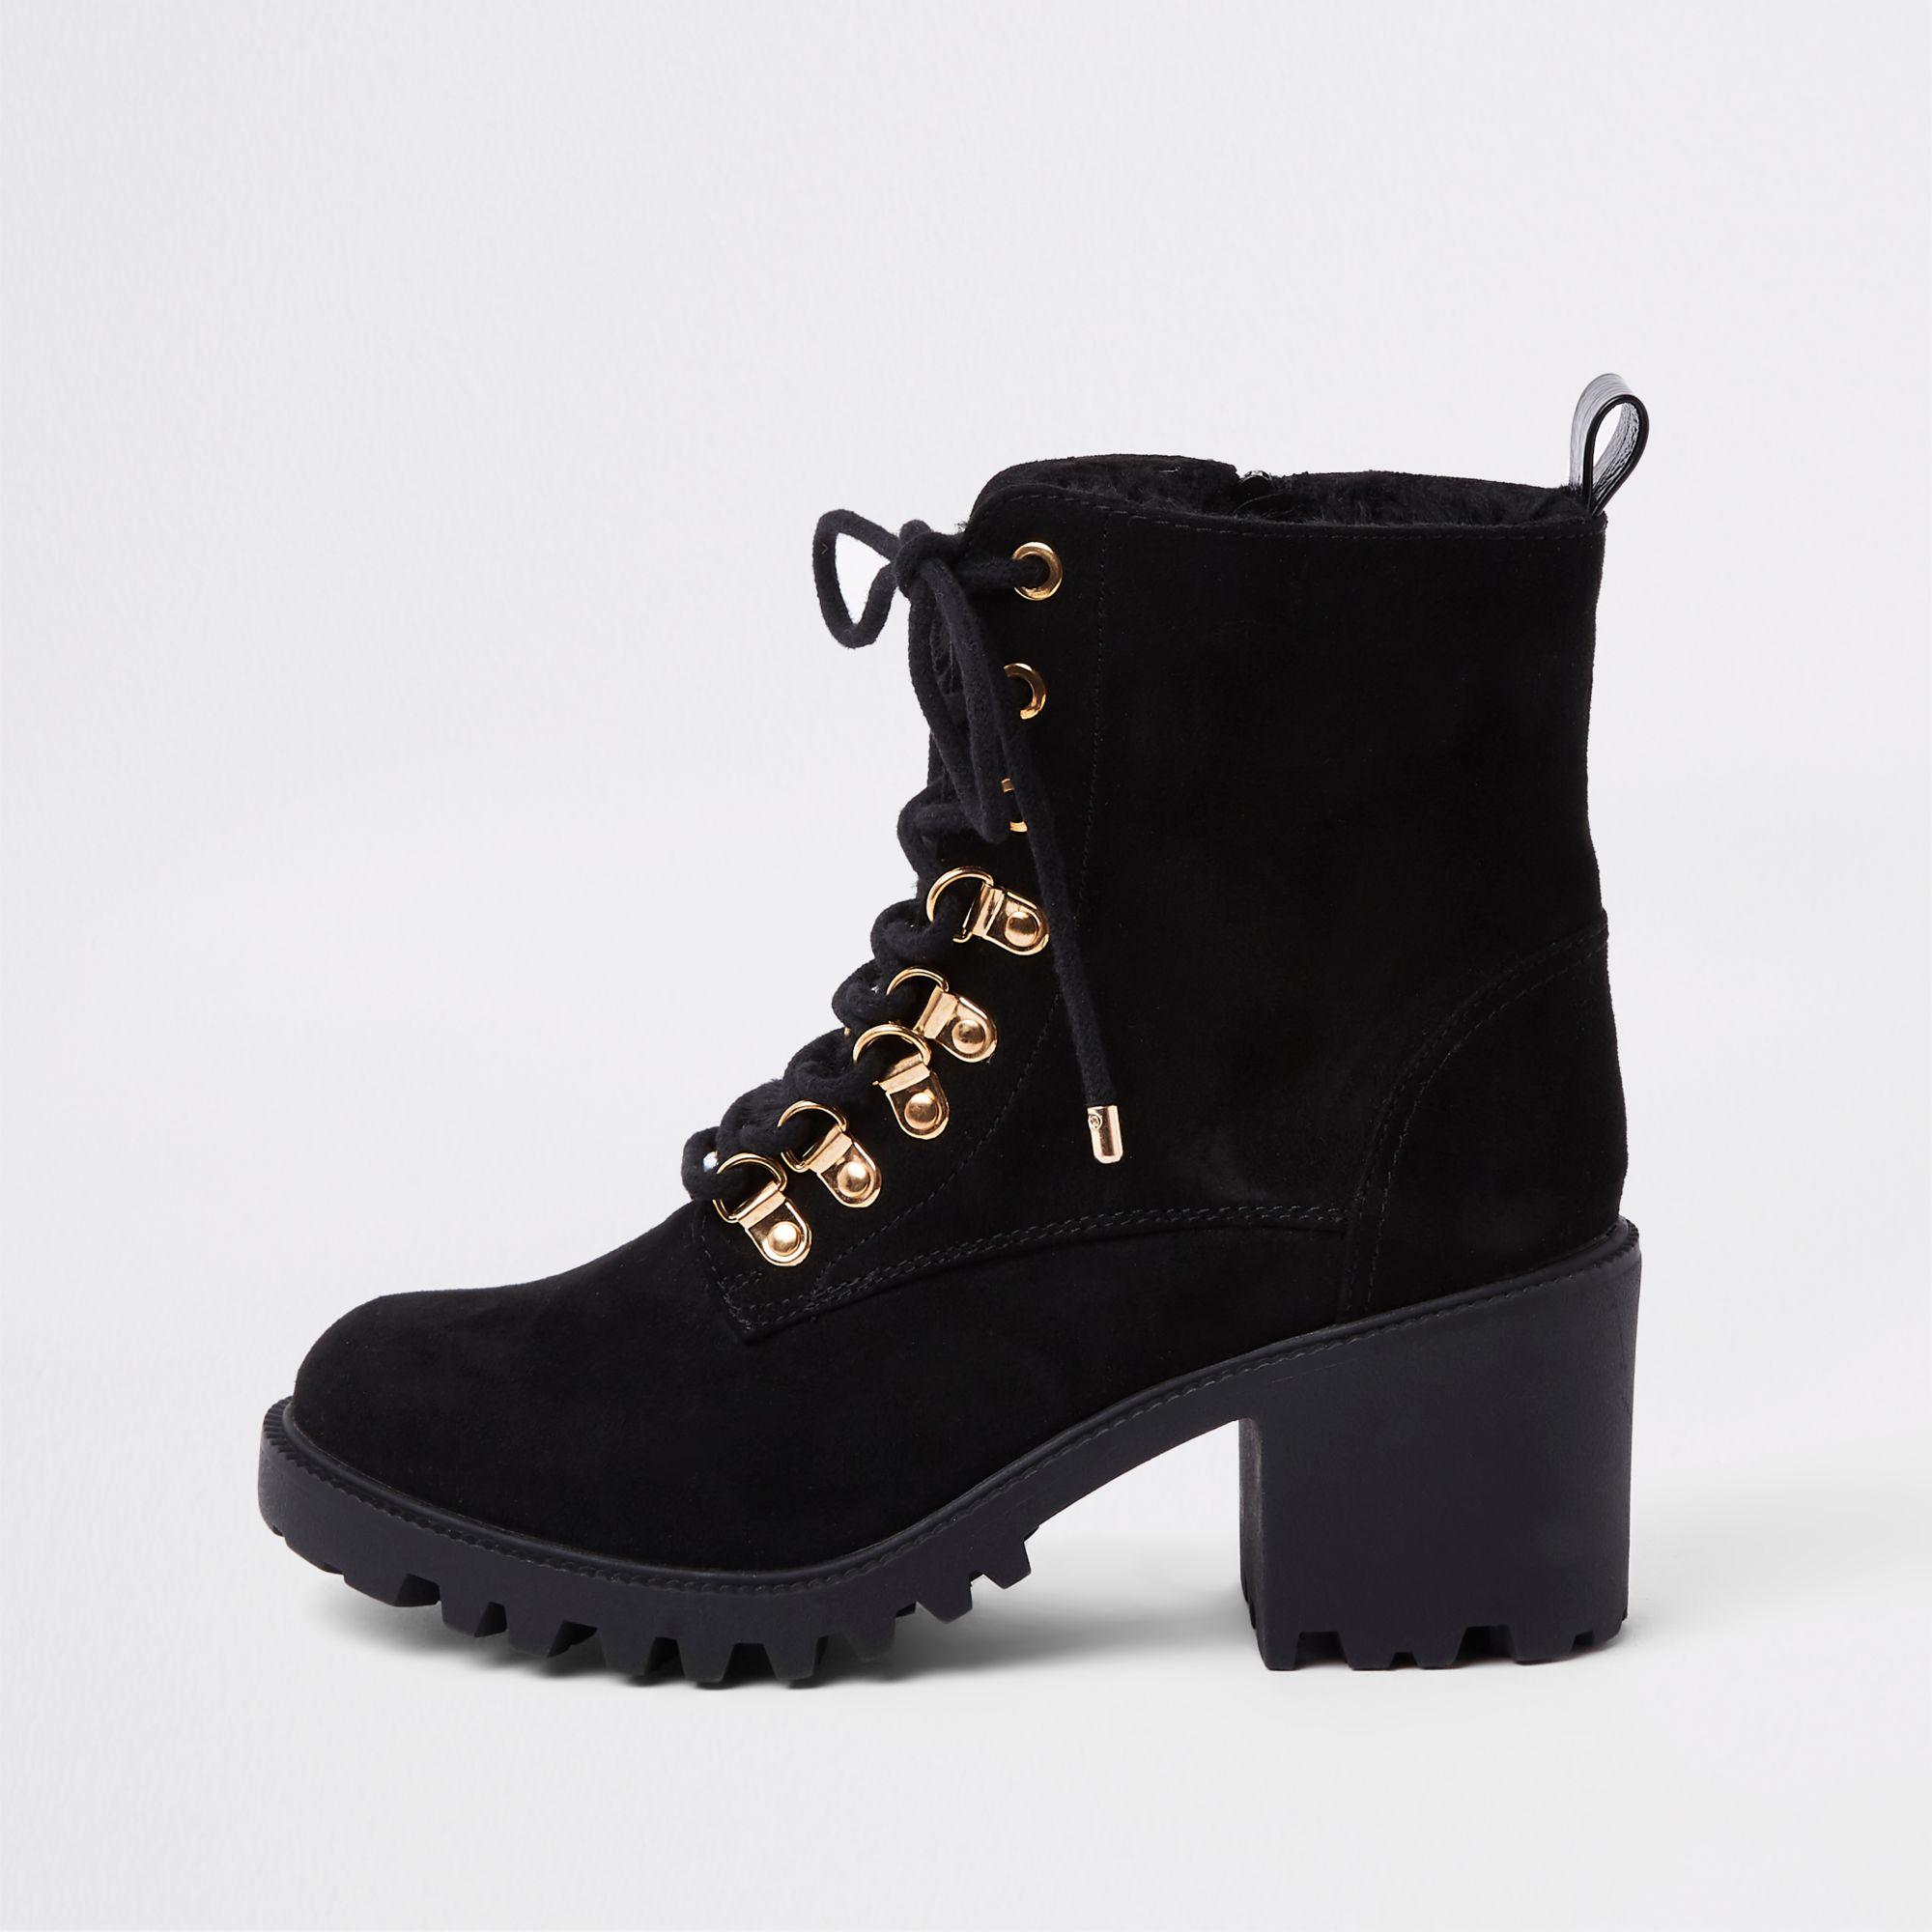 Lyst - River Island Faux Fur Tongue Lace-up Chunky Boots in Black